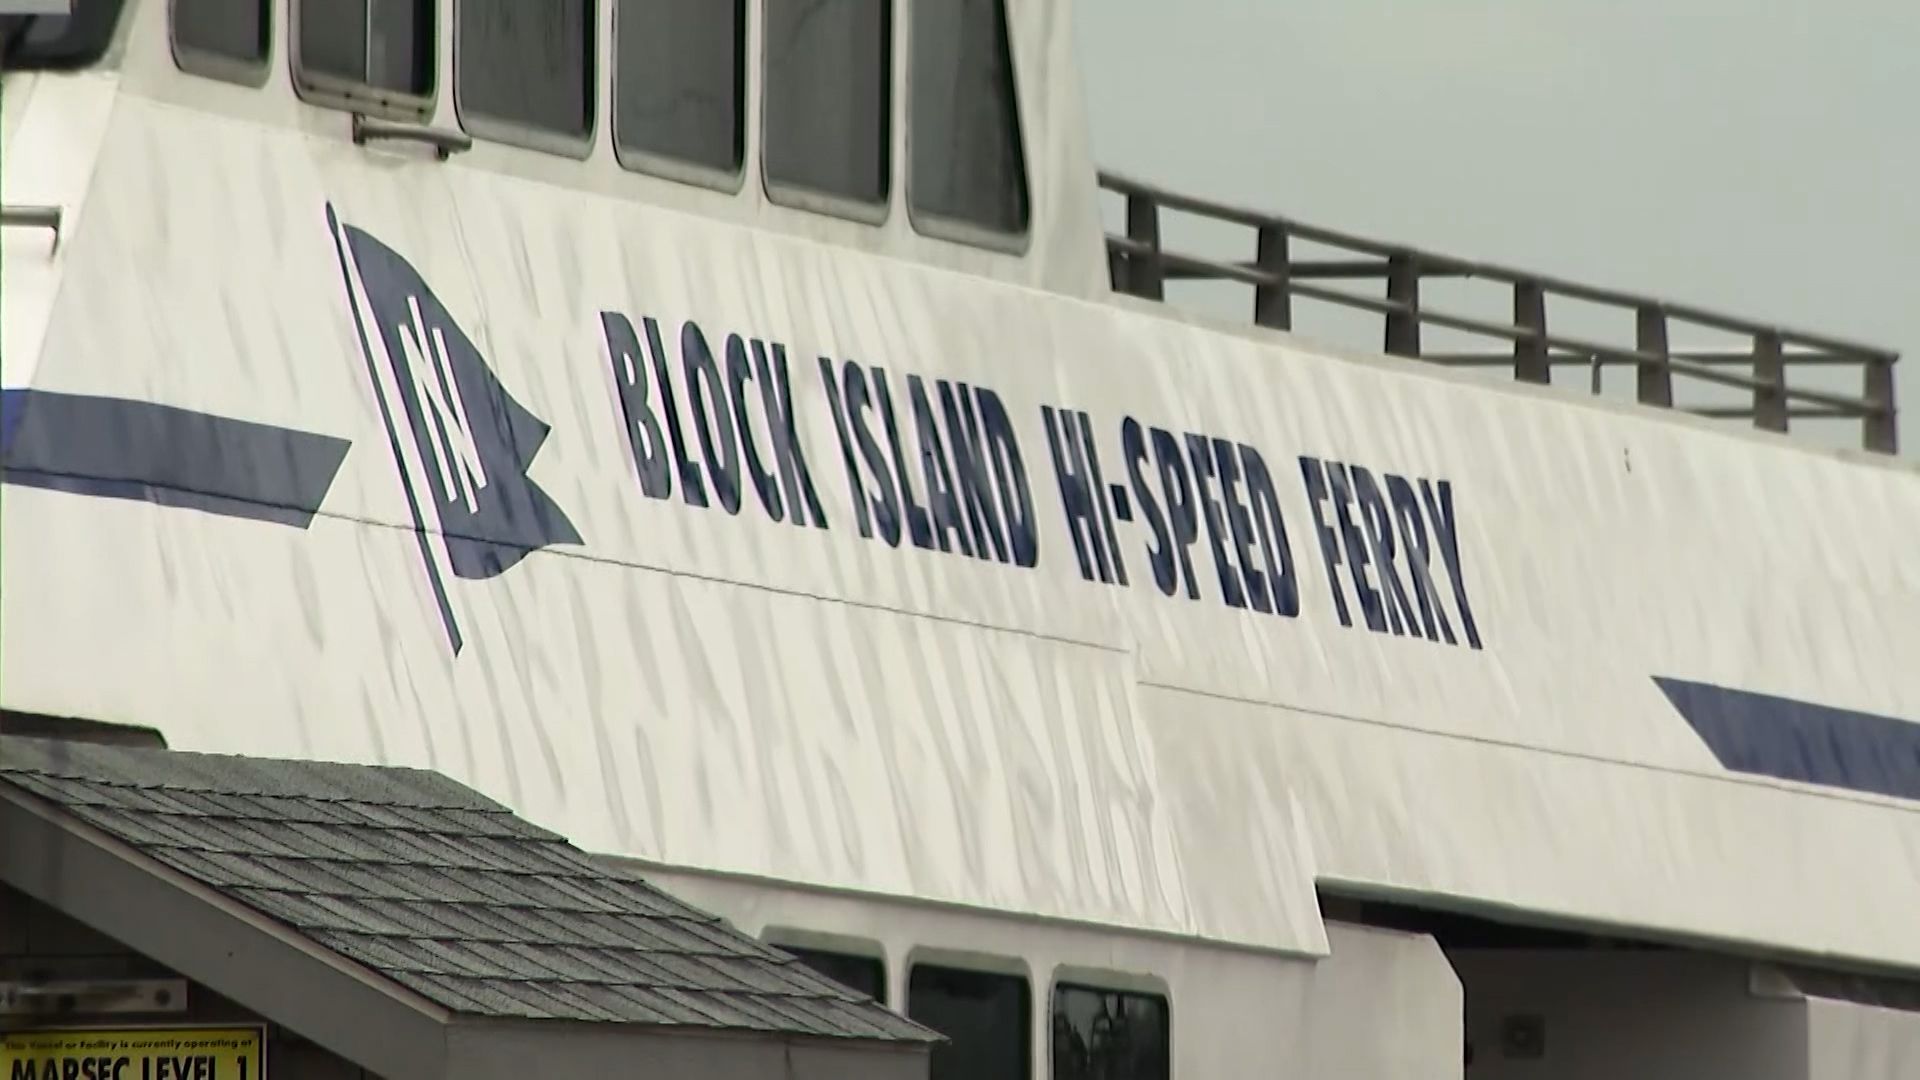 Block Island Ferry cancels service for 4th straight day